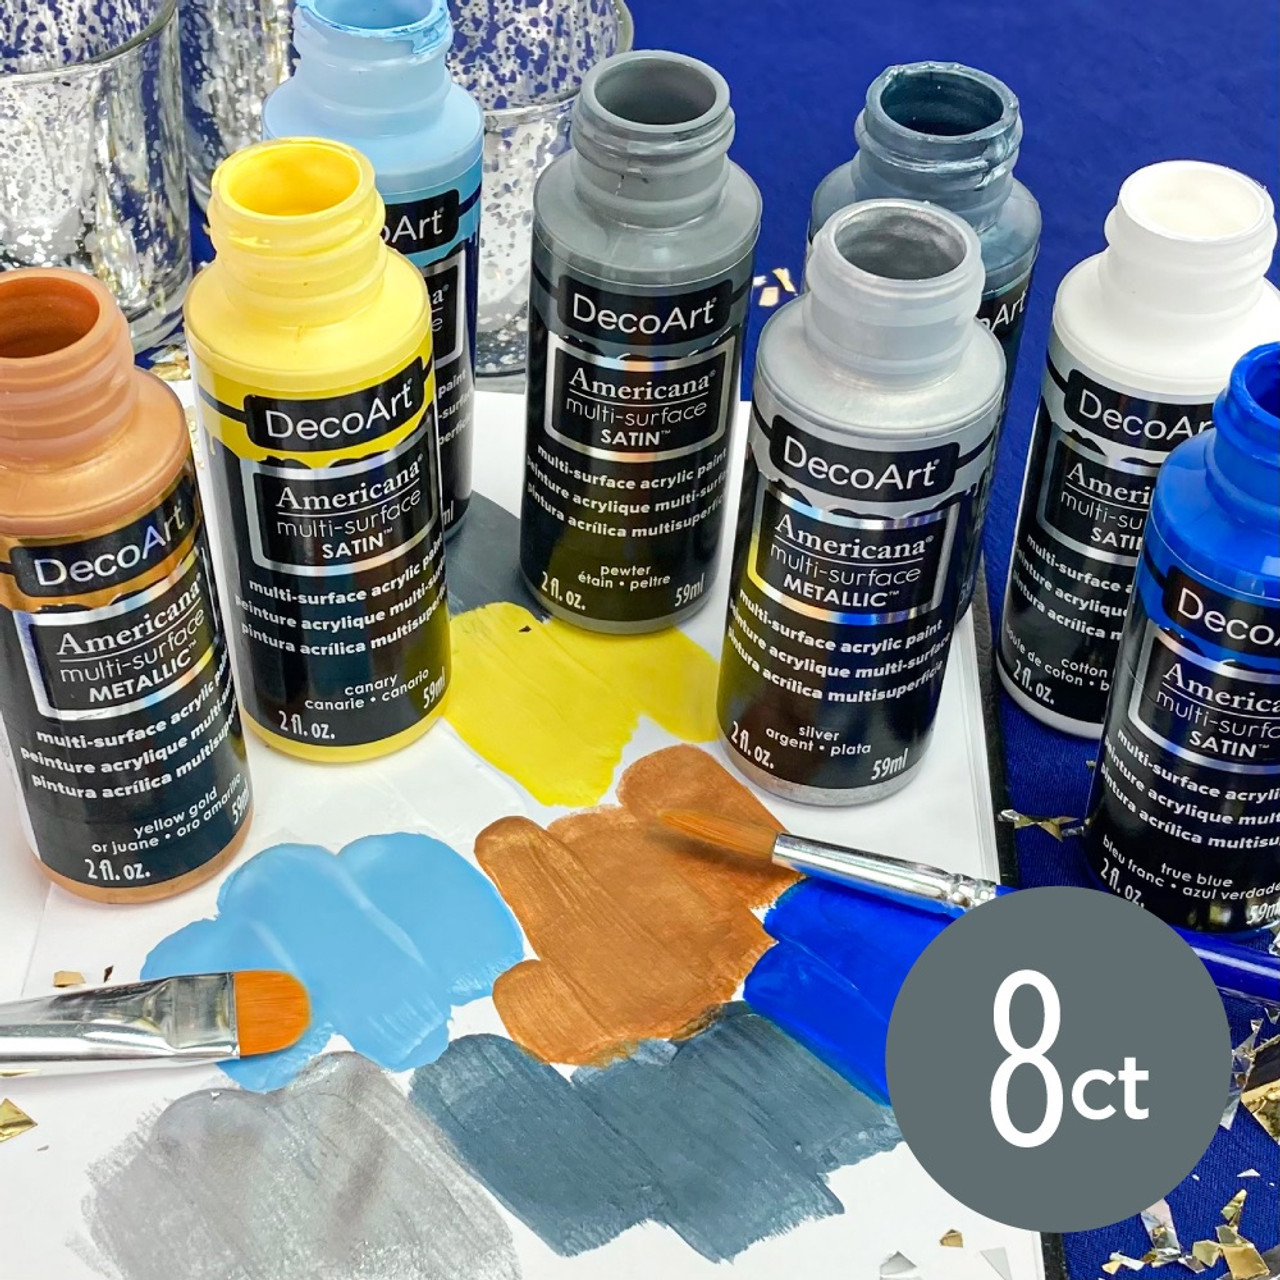 Stained Glass Effect Paint Set - 6 Pieces, Hobby Lobby